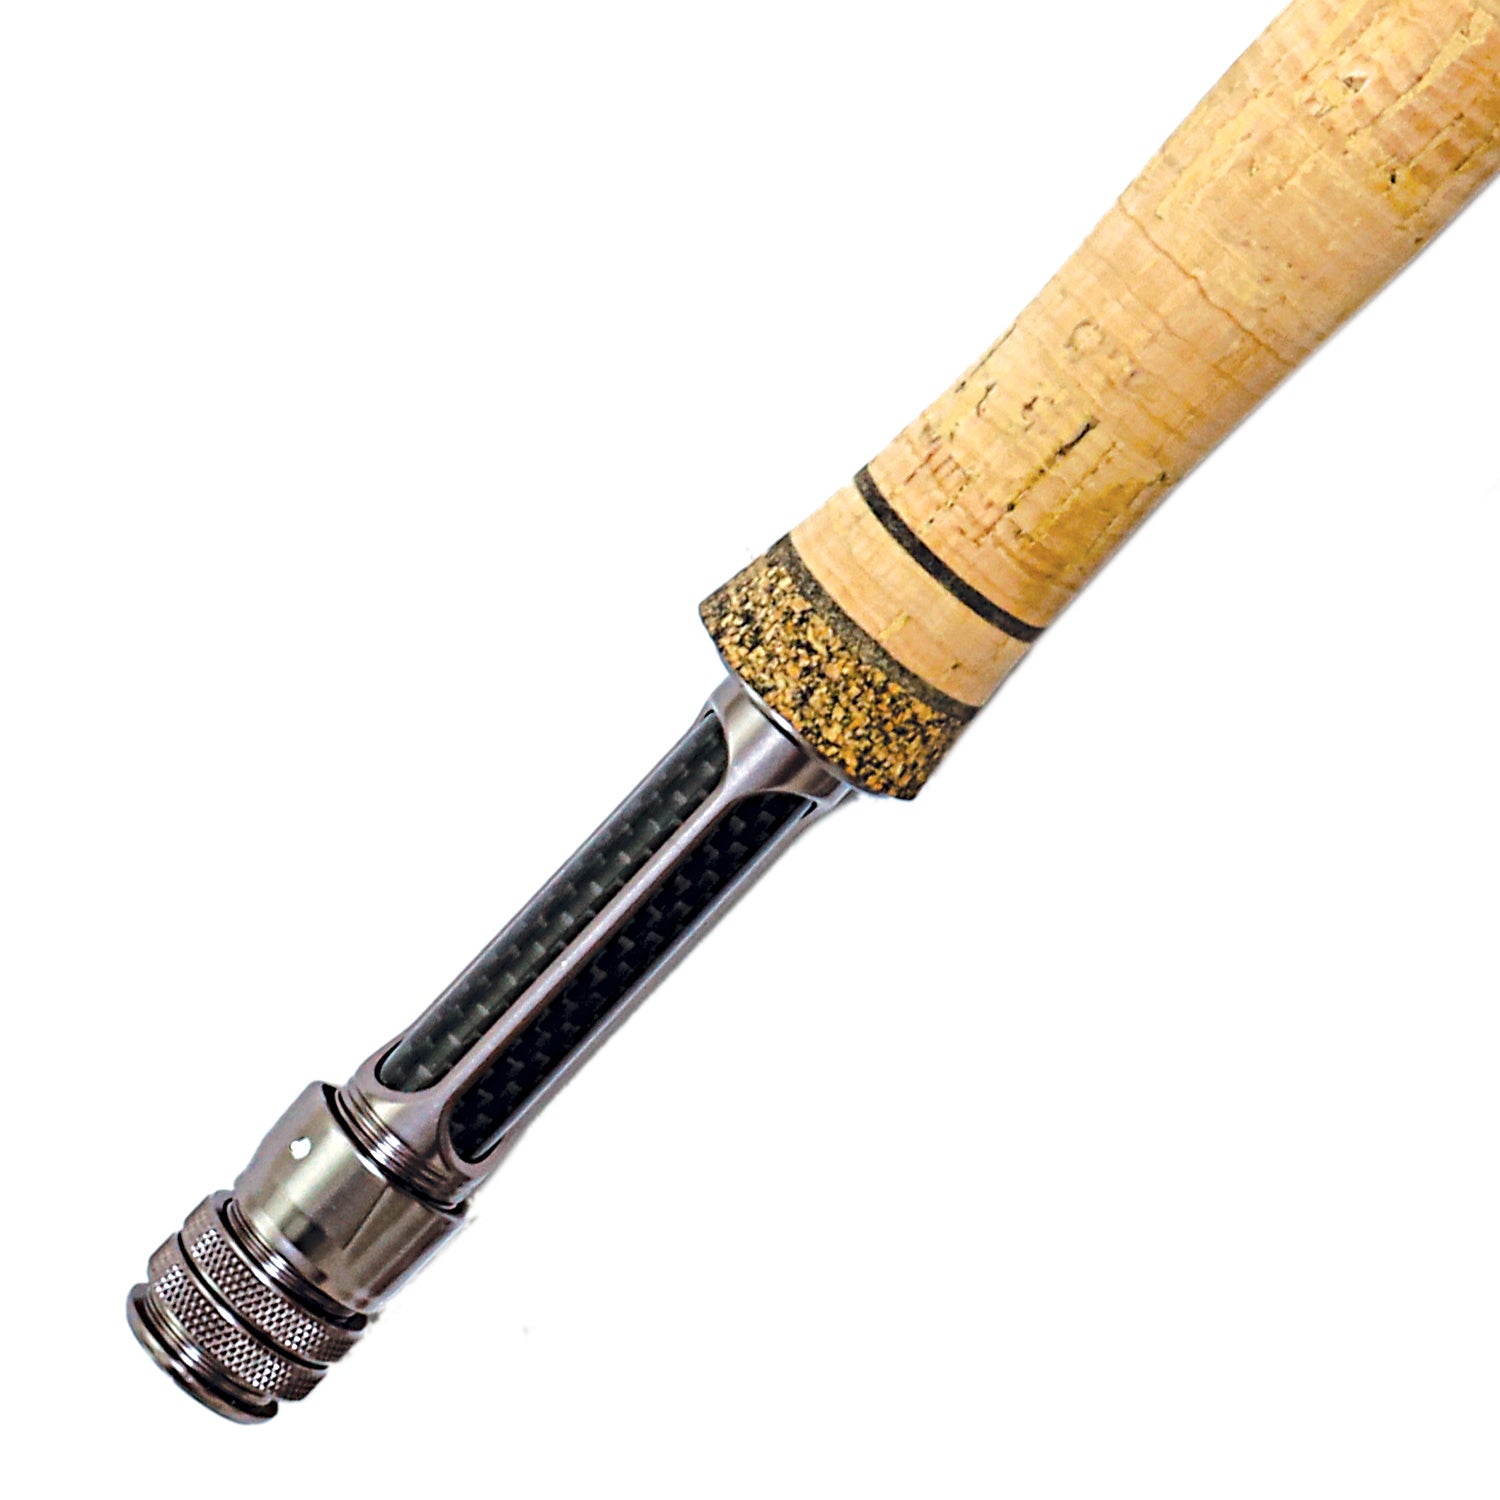 EAGLE CLAW FLY ROD - Kidd Family Auctions